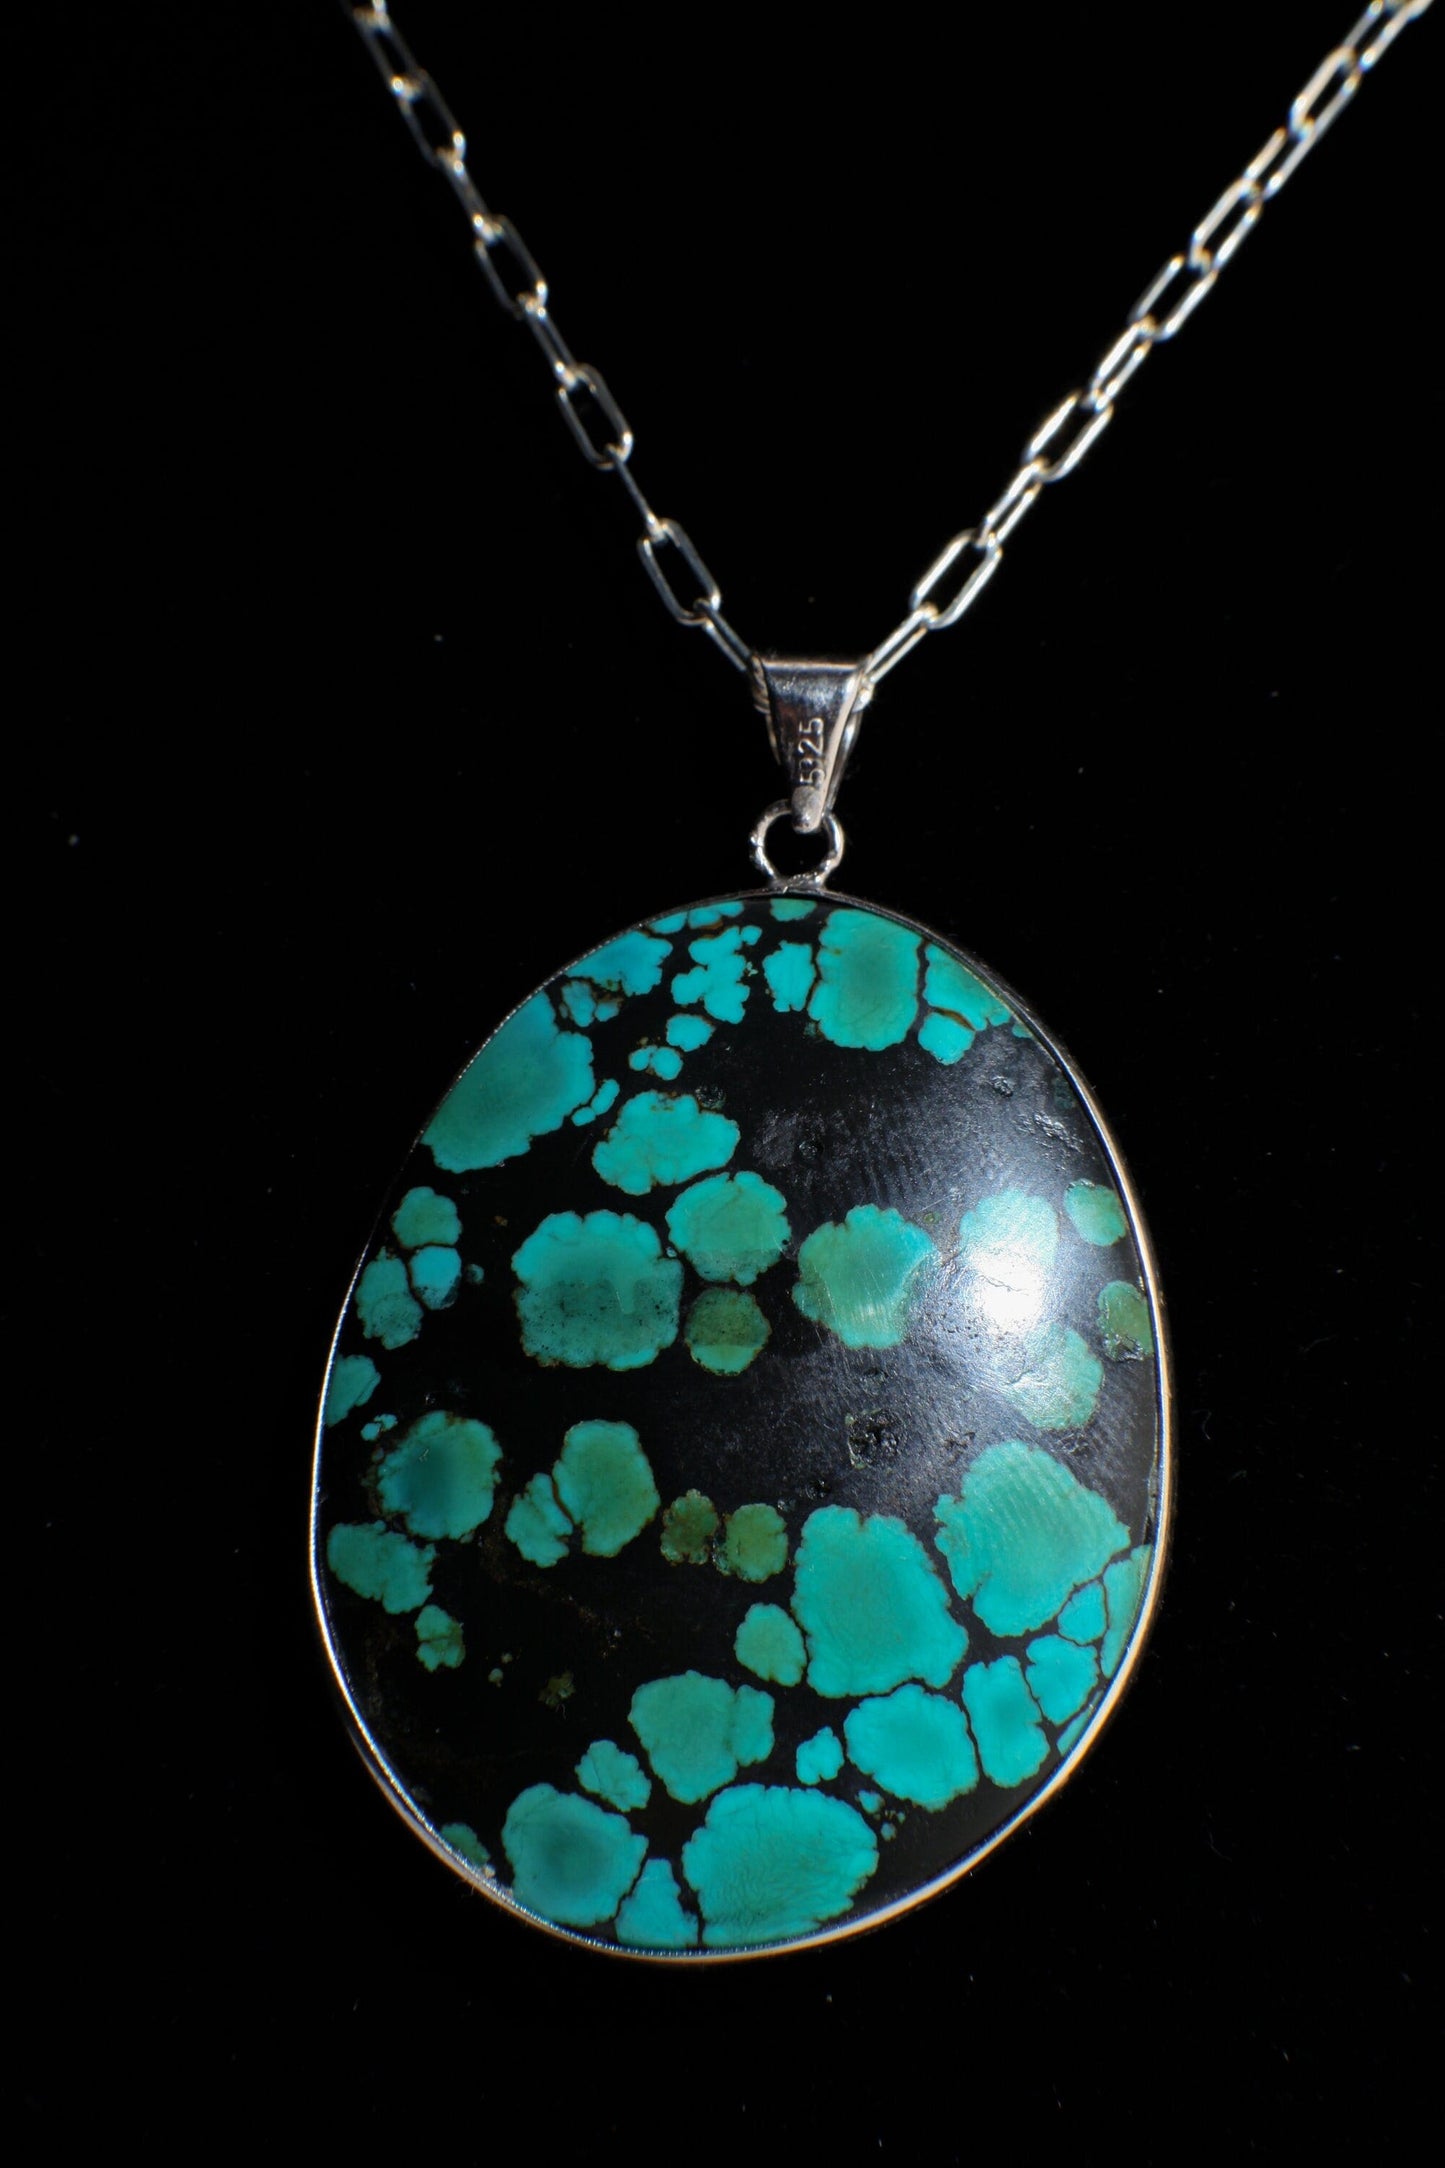 Turquoise Pendant, Genuine AAA Tibetan Spiderweb Turquoise Cab Gemstone 925 Sterling Silver Bezel Pendant, Option: Silver Chain,39x50mm 20g